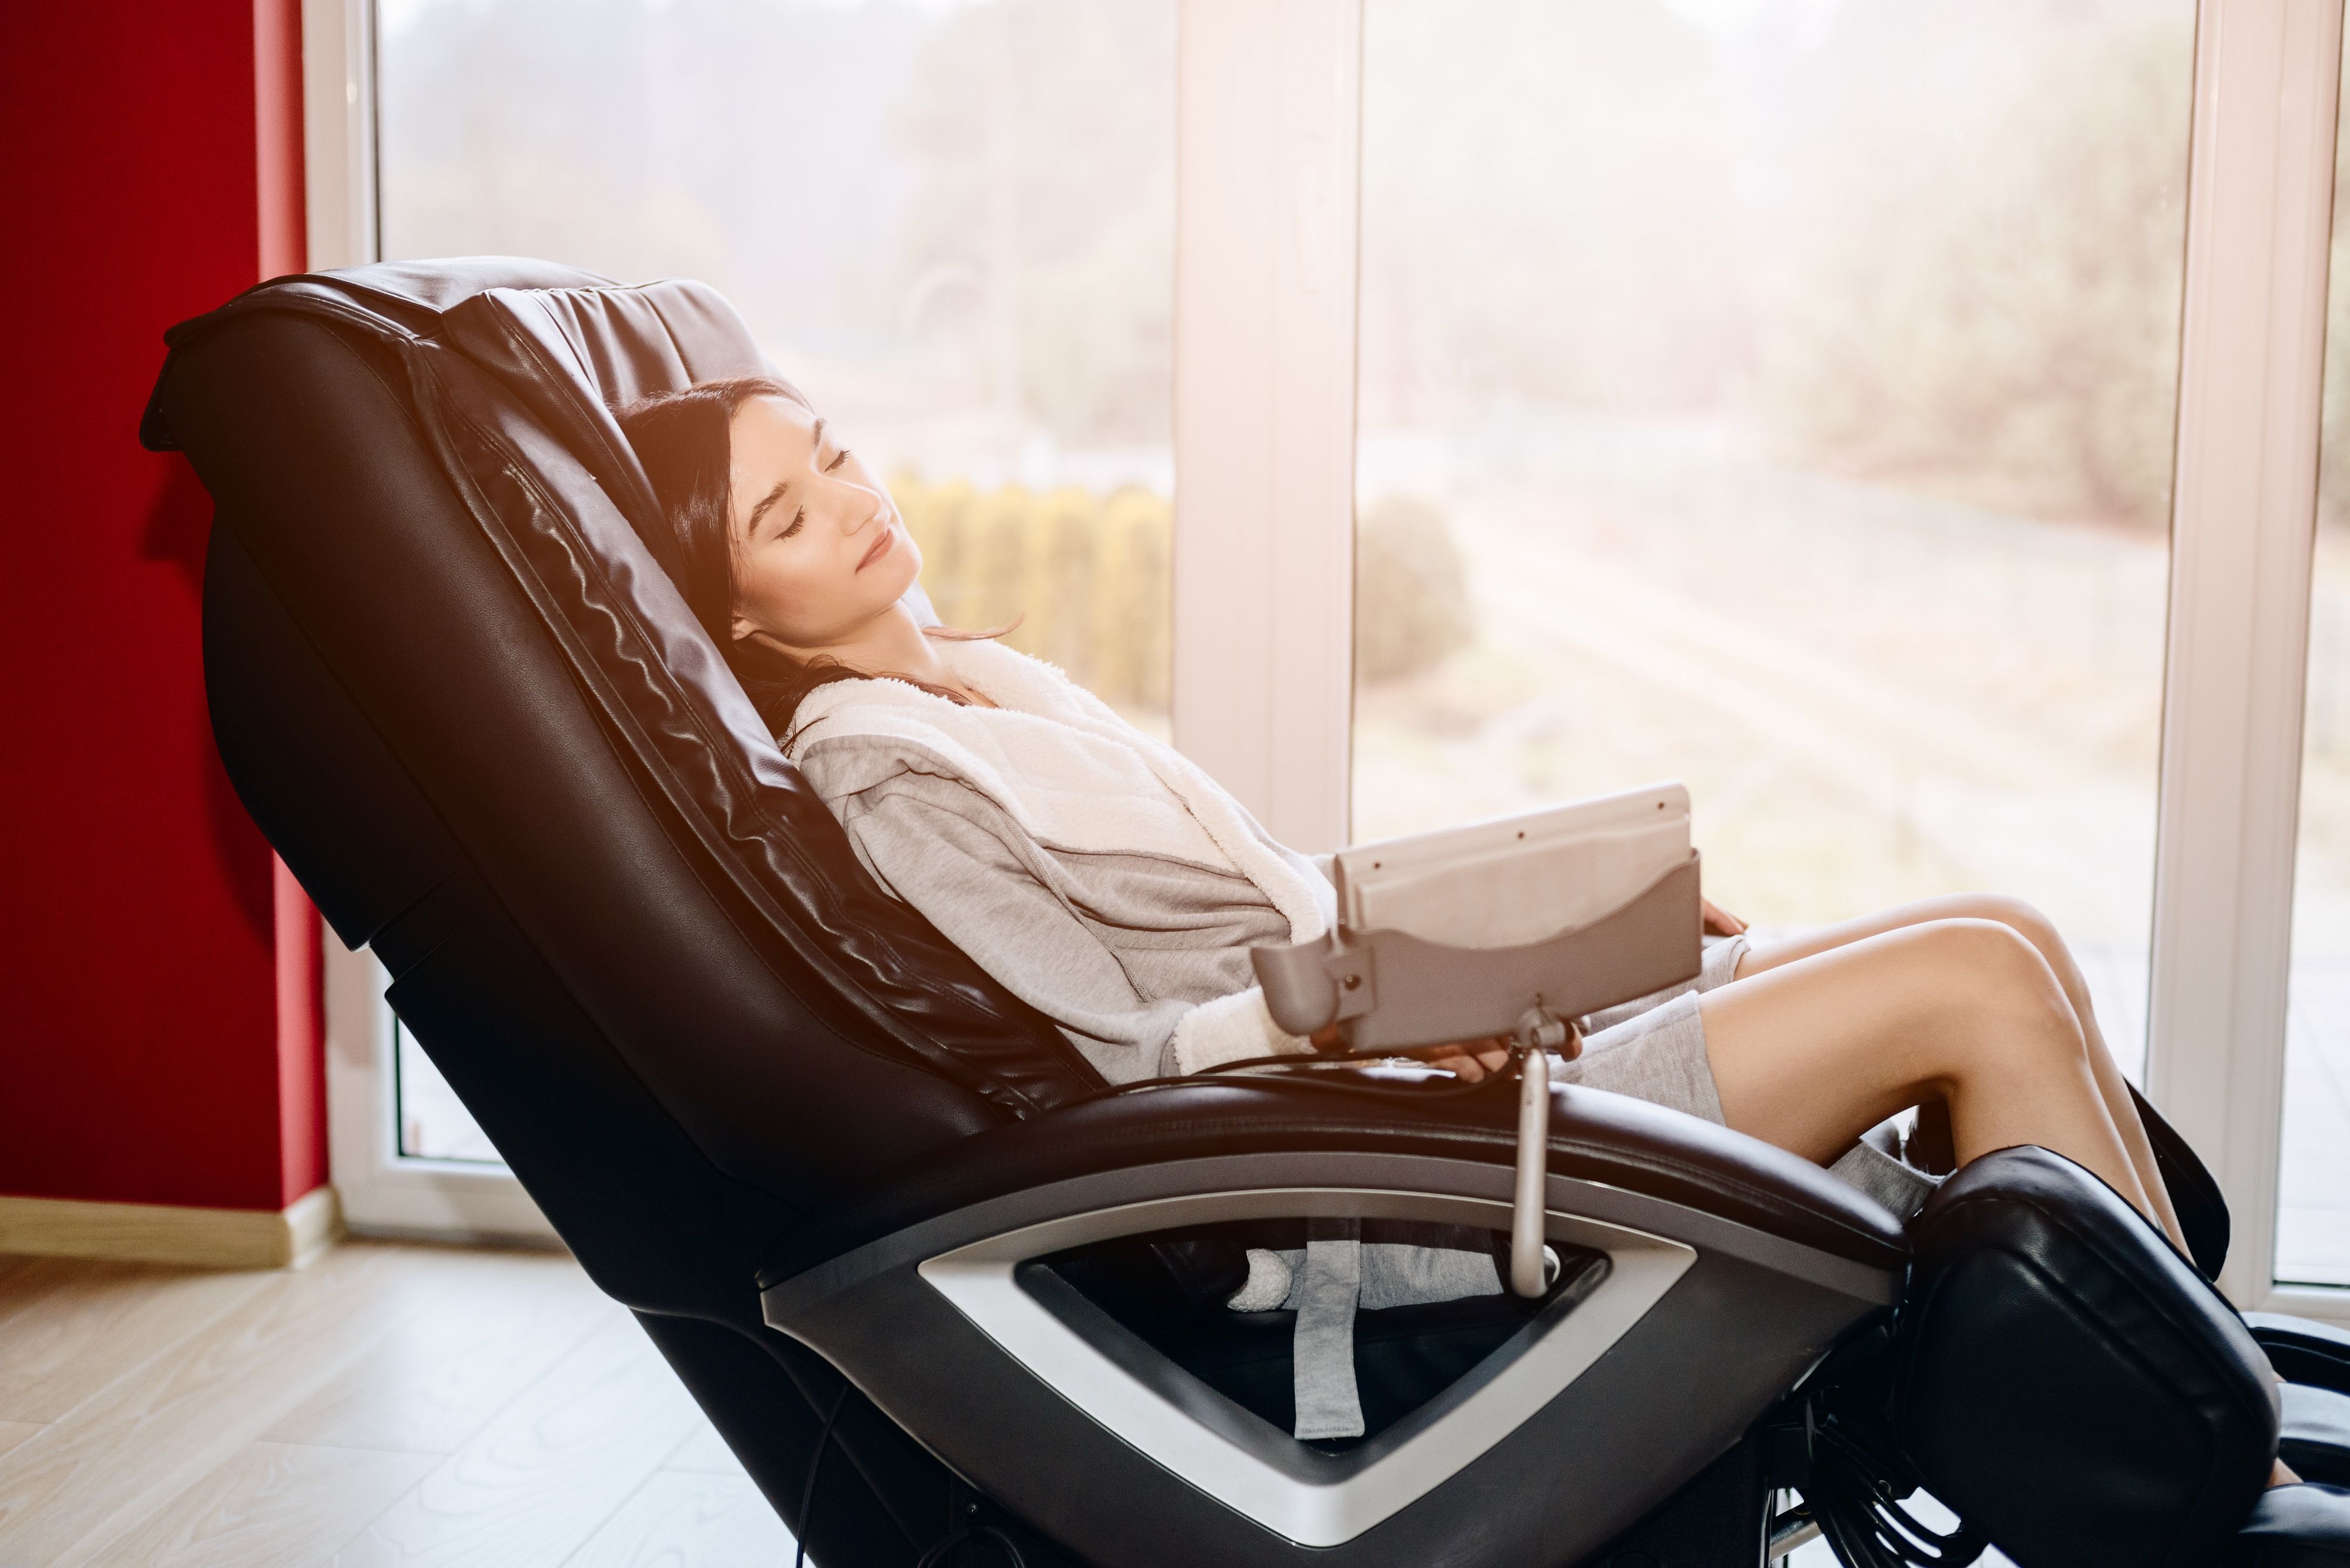 https://hips.hearstapps.com/hmg-prod/images/young-woman-relaxing-on-the-massaging-chair-royalty-free-image-1688576898.jpg